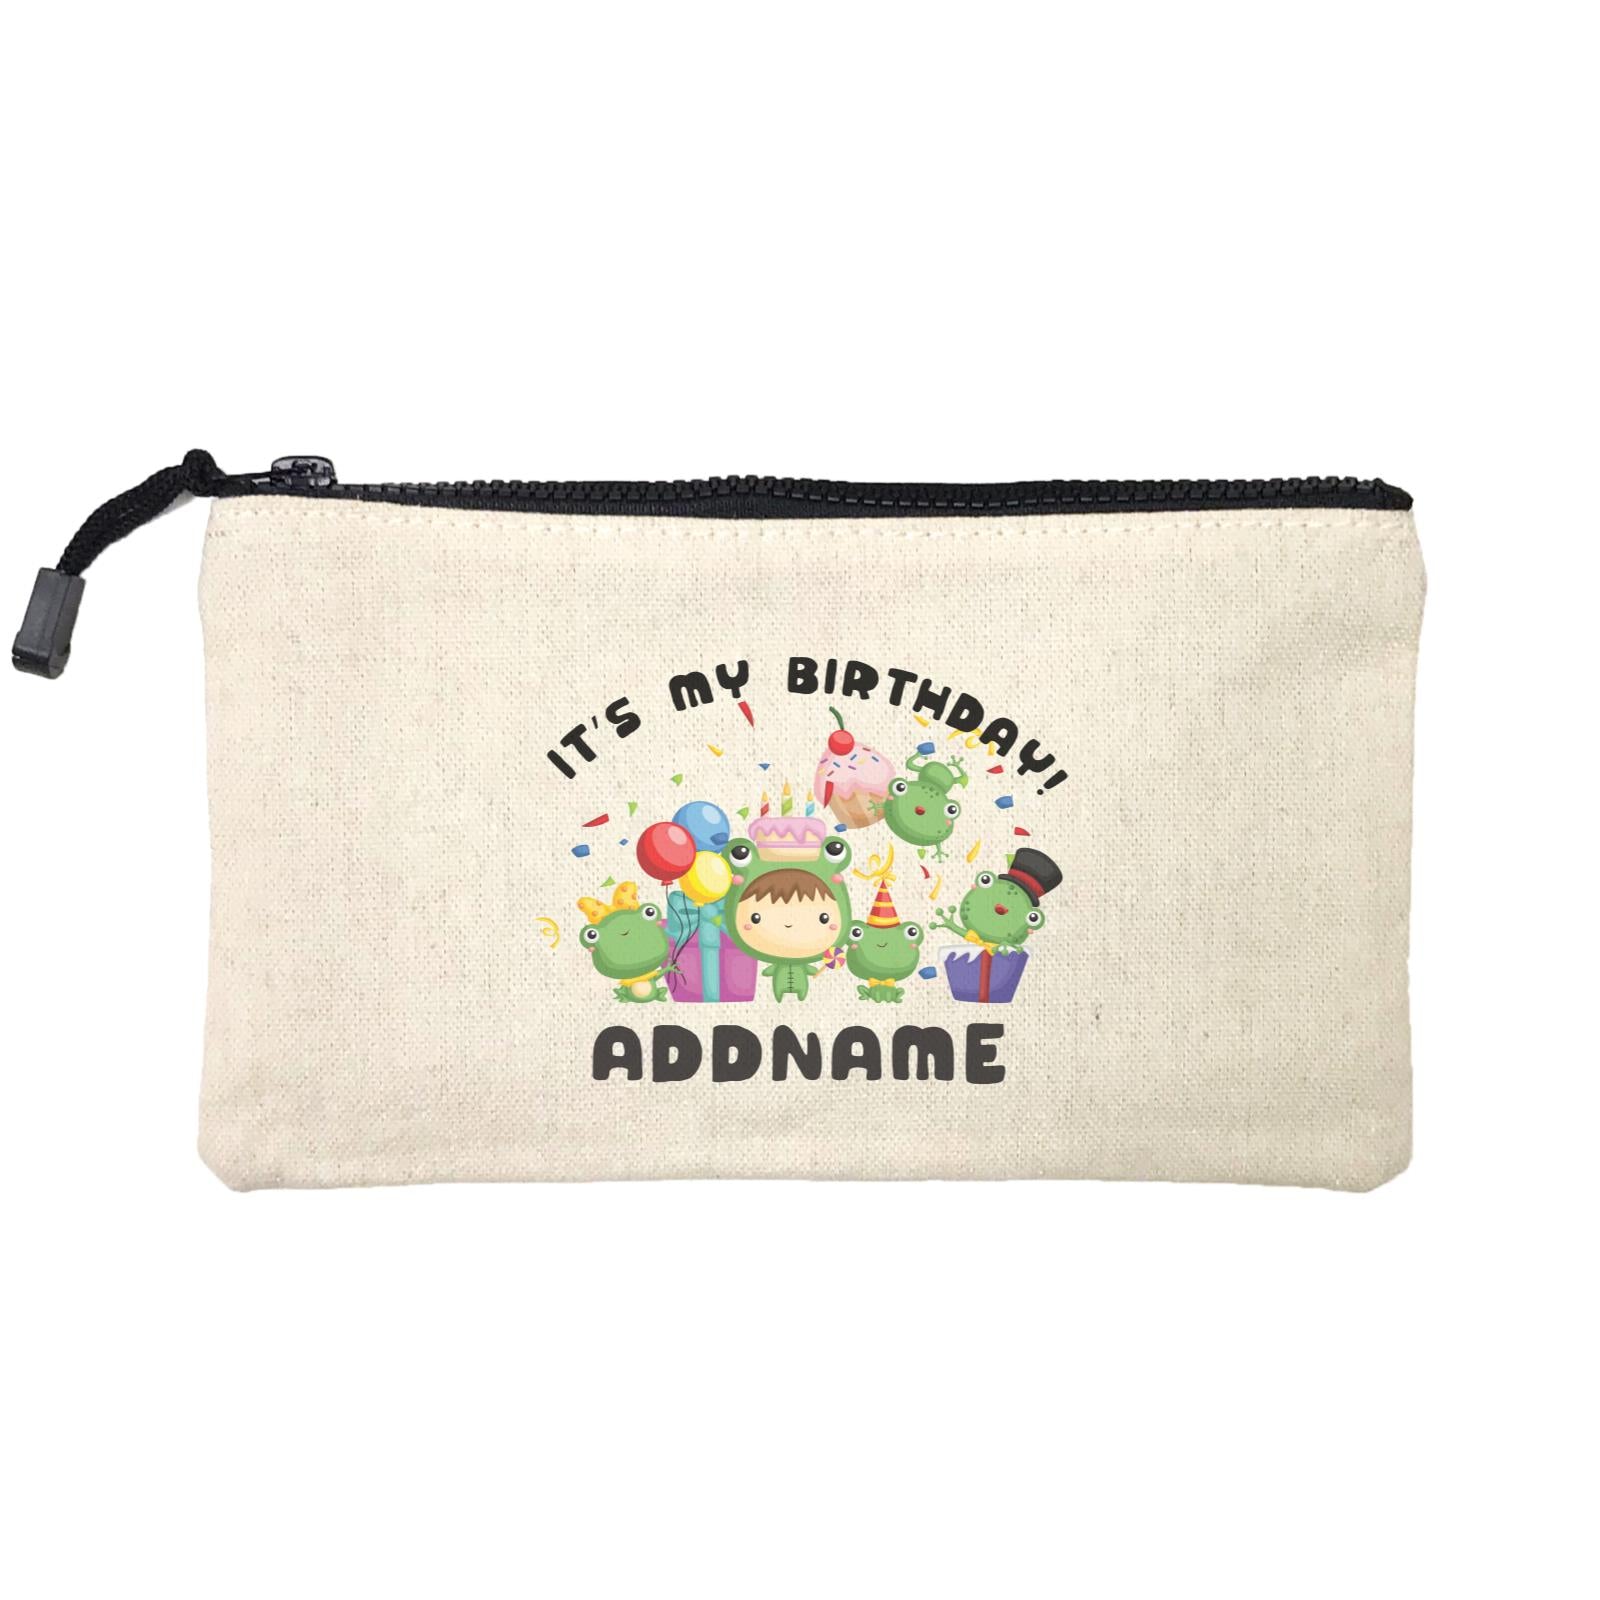 Birthday Frog Happy Frog Group It's My Birthday Addname Mini Accessories Stationery Pouch